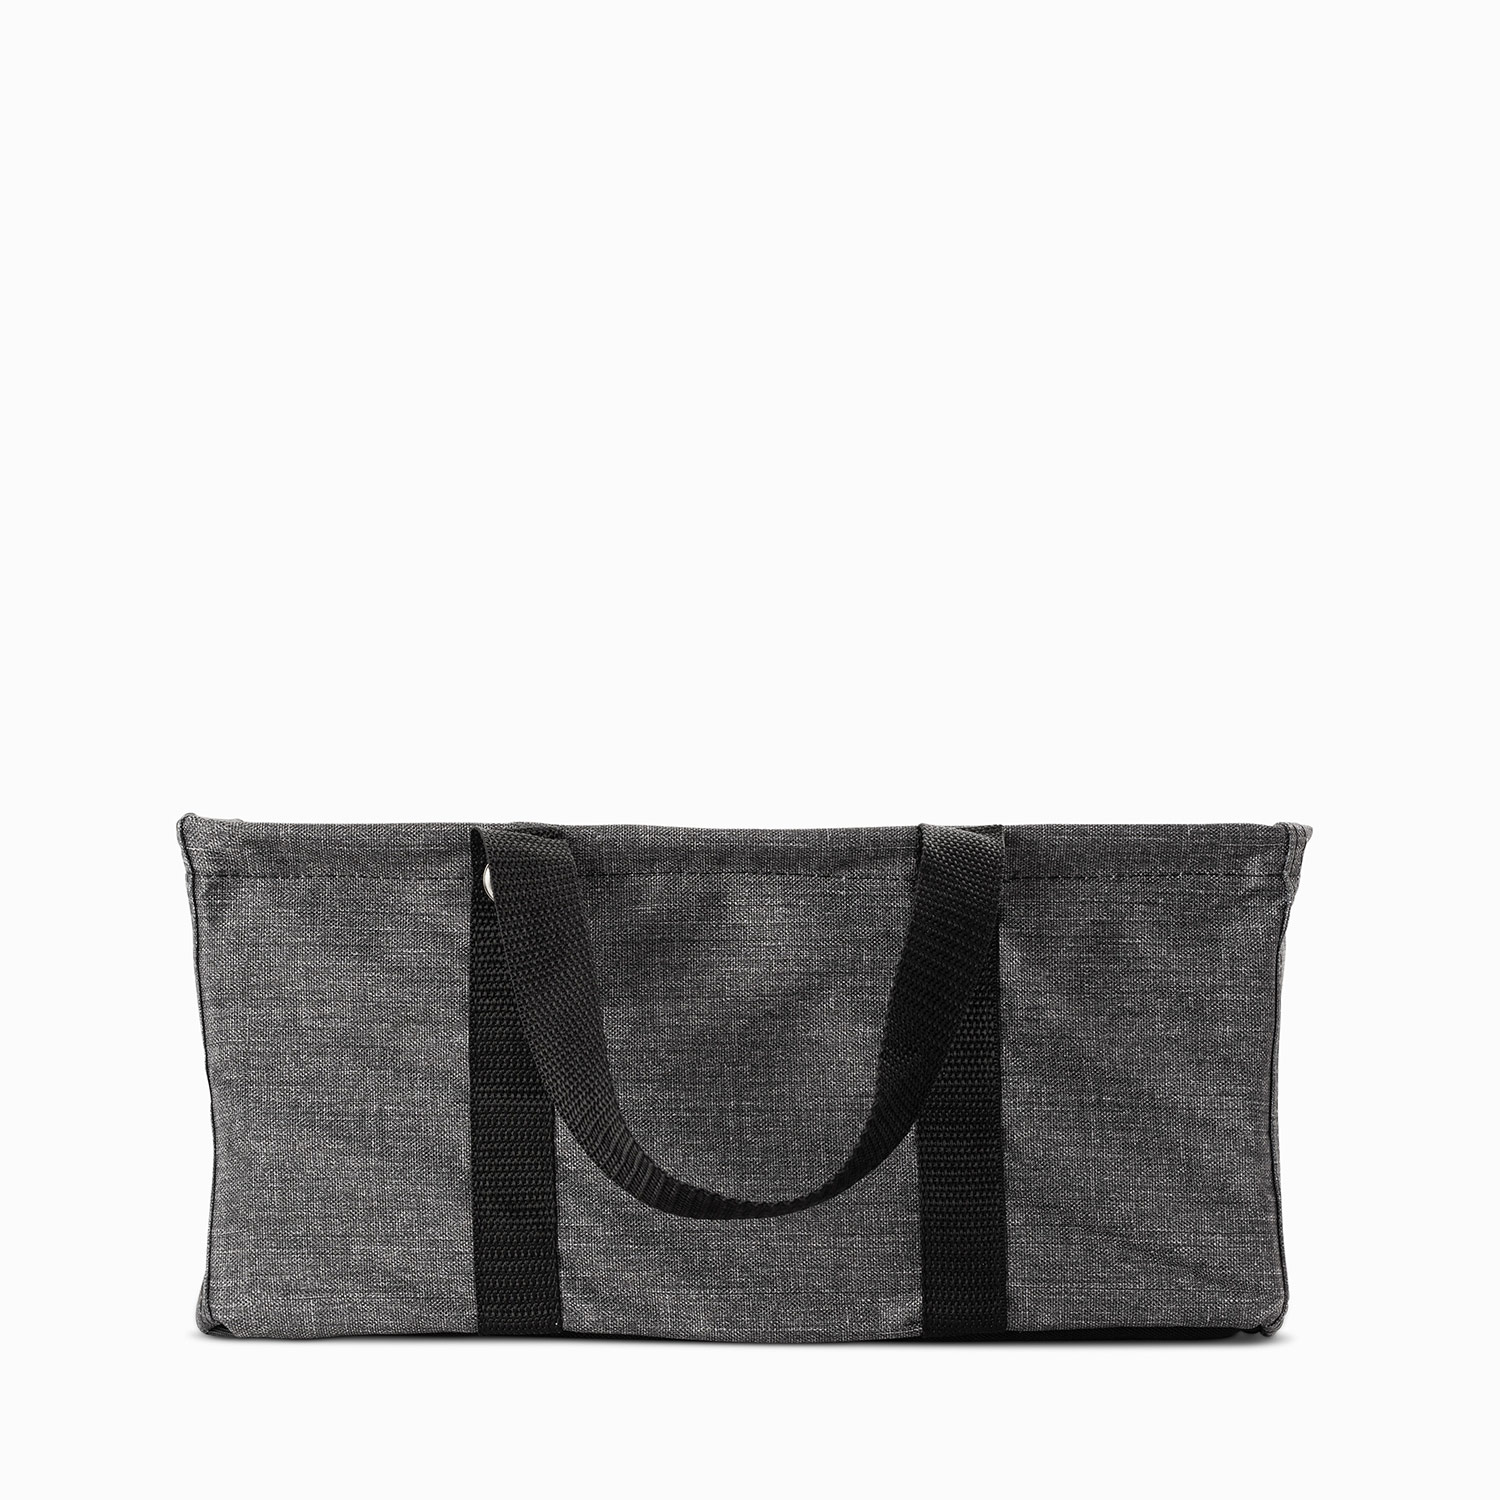 Thirty One 31 Small Utility Tote, New In Packaging Vista Stripe